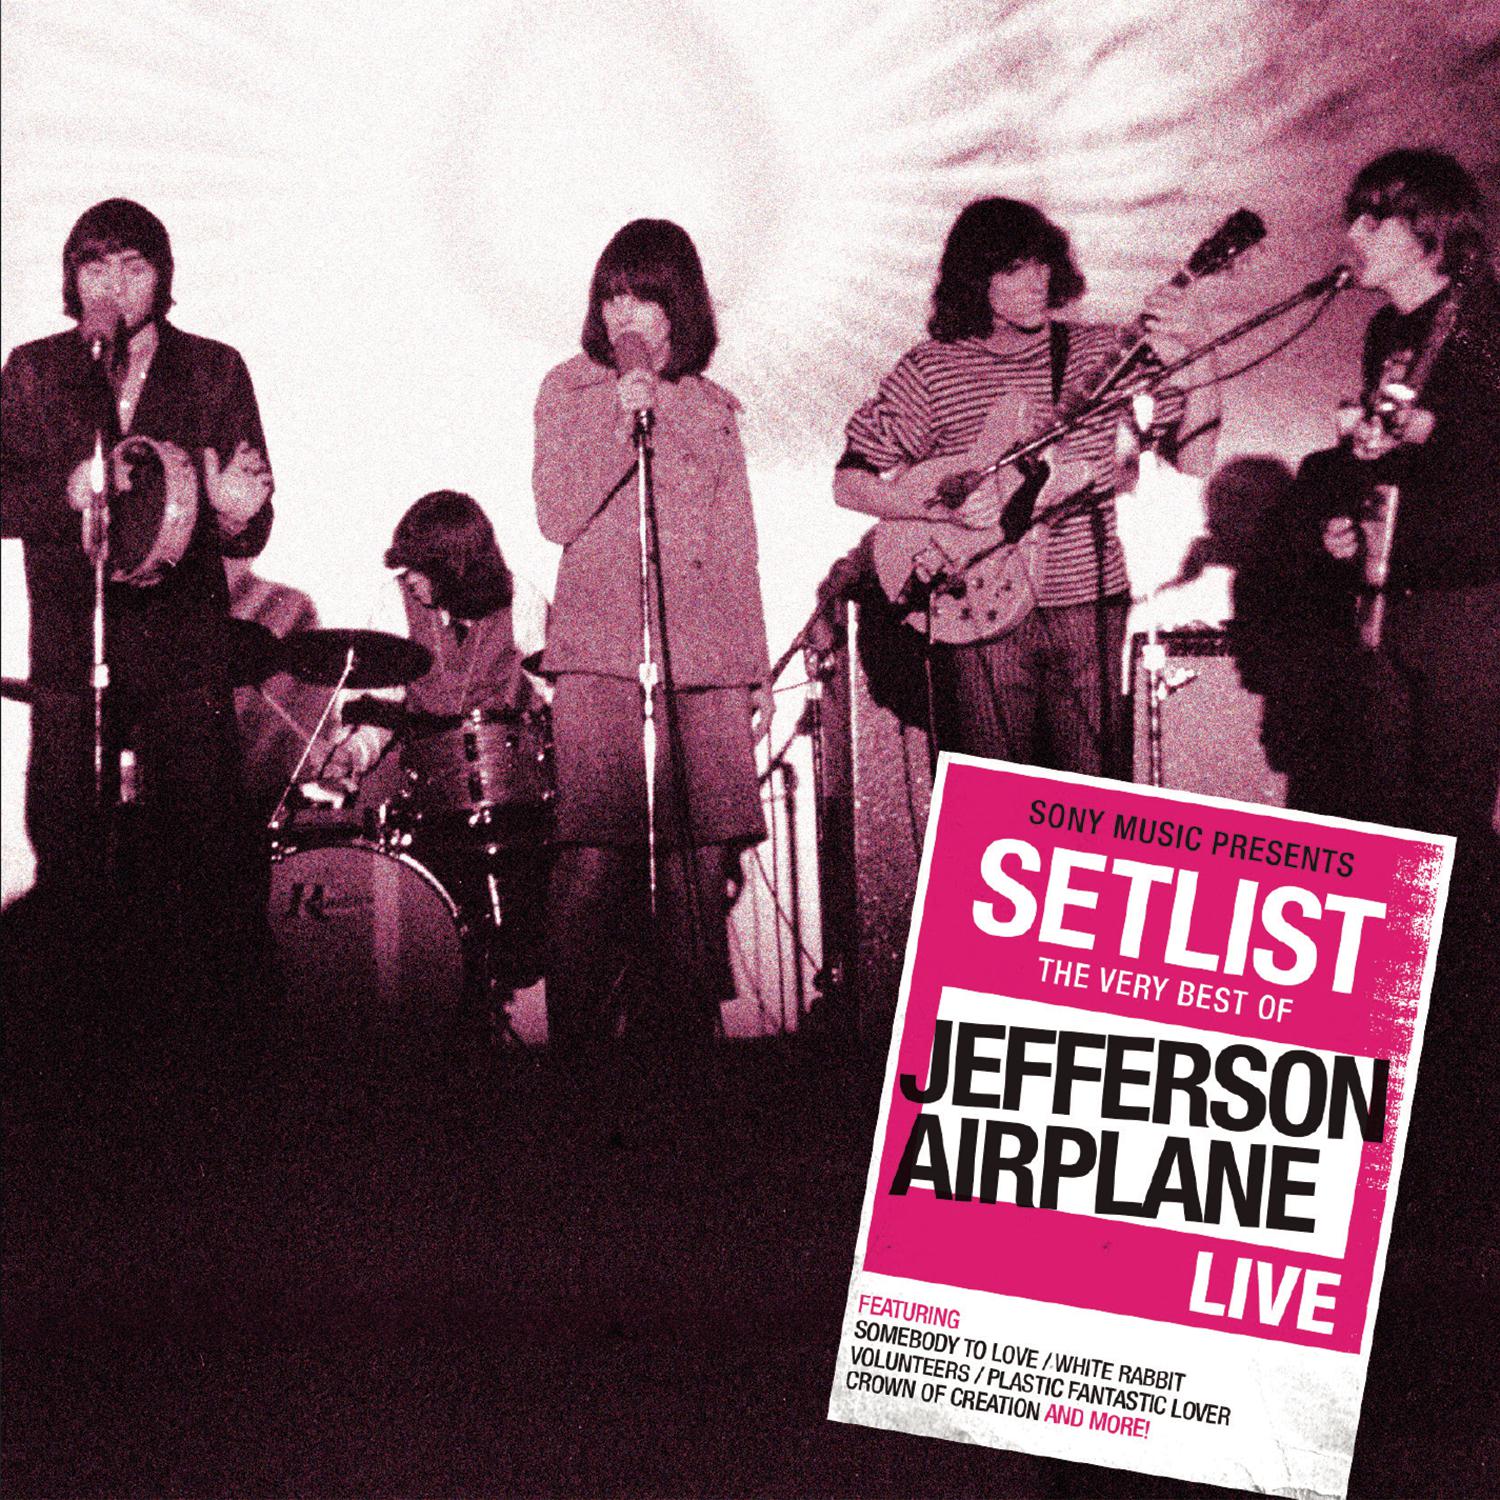 Setlist: The Very Best Of Jefferson Airplane LIVE